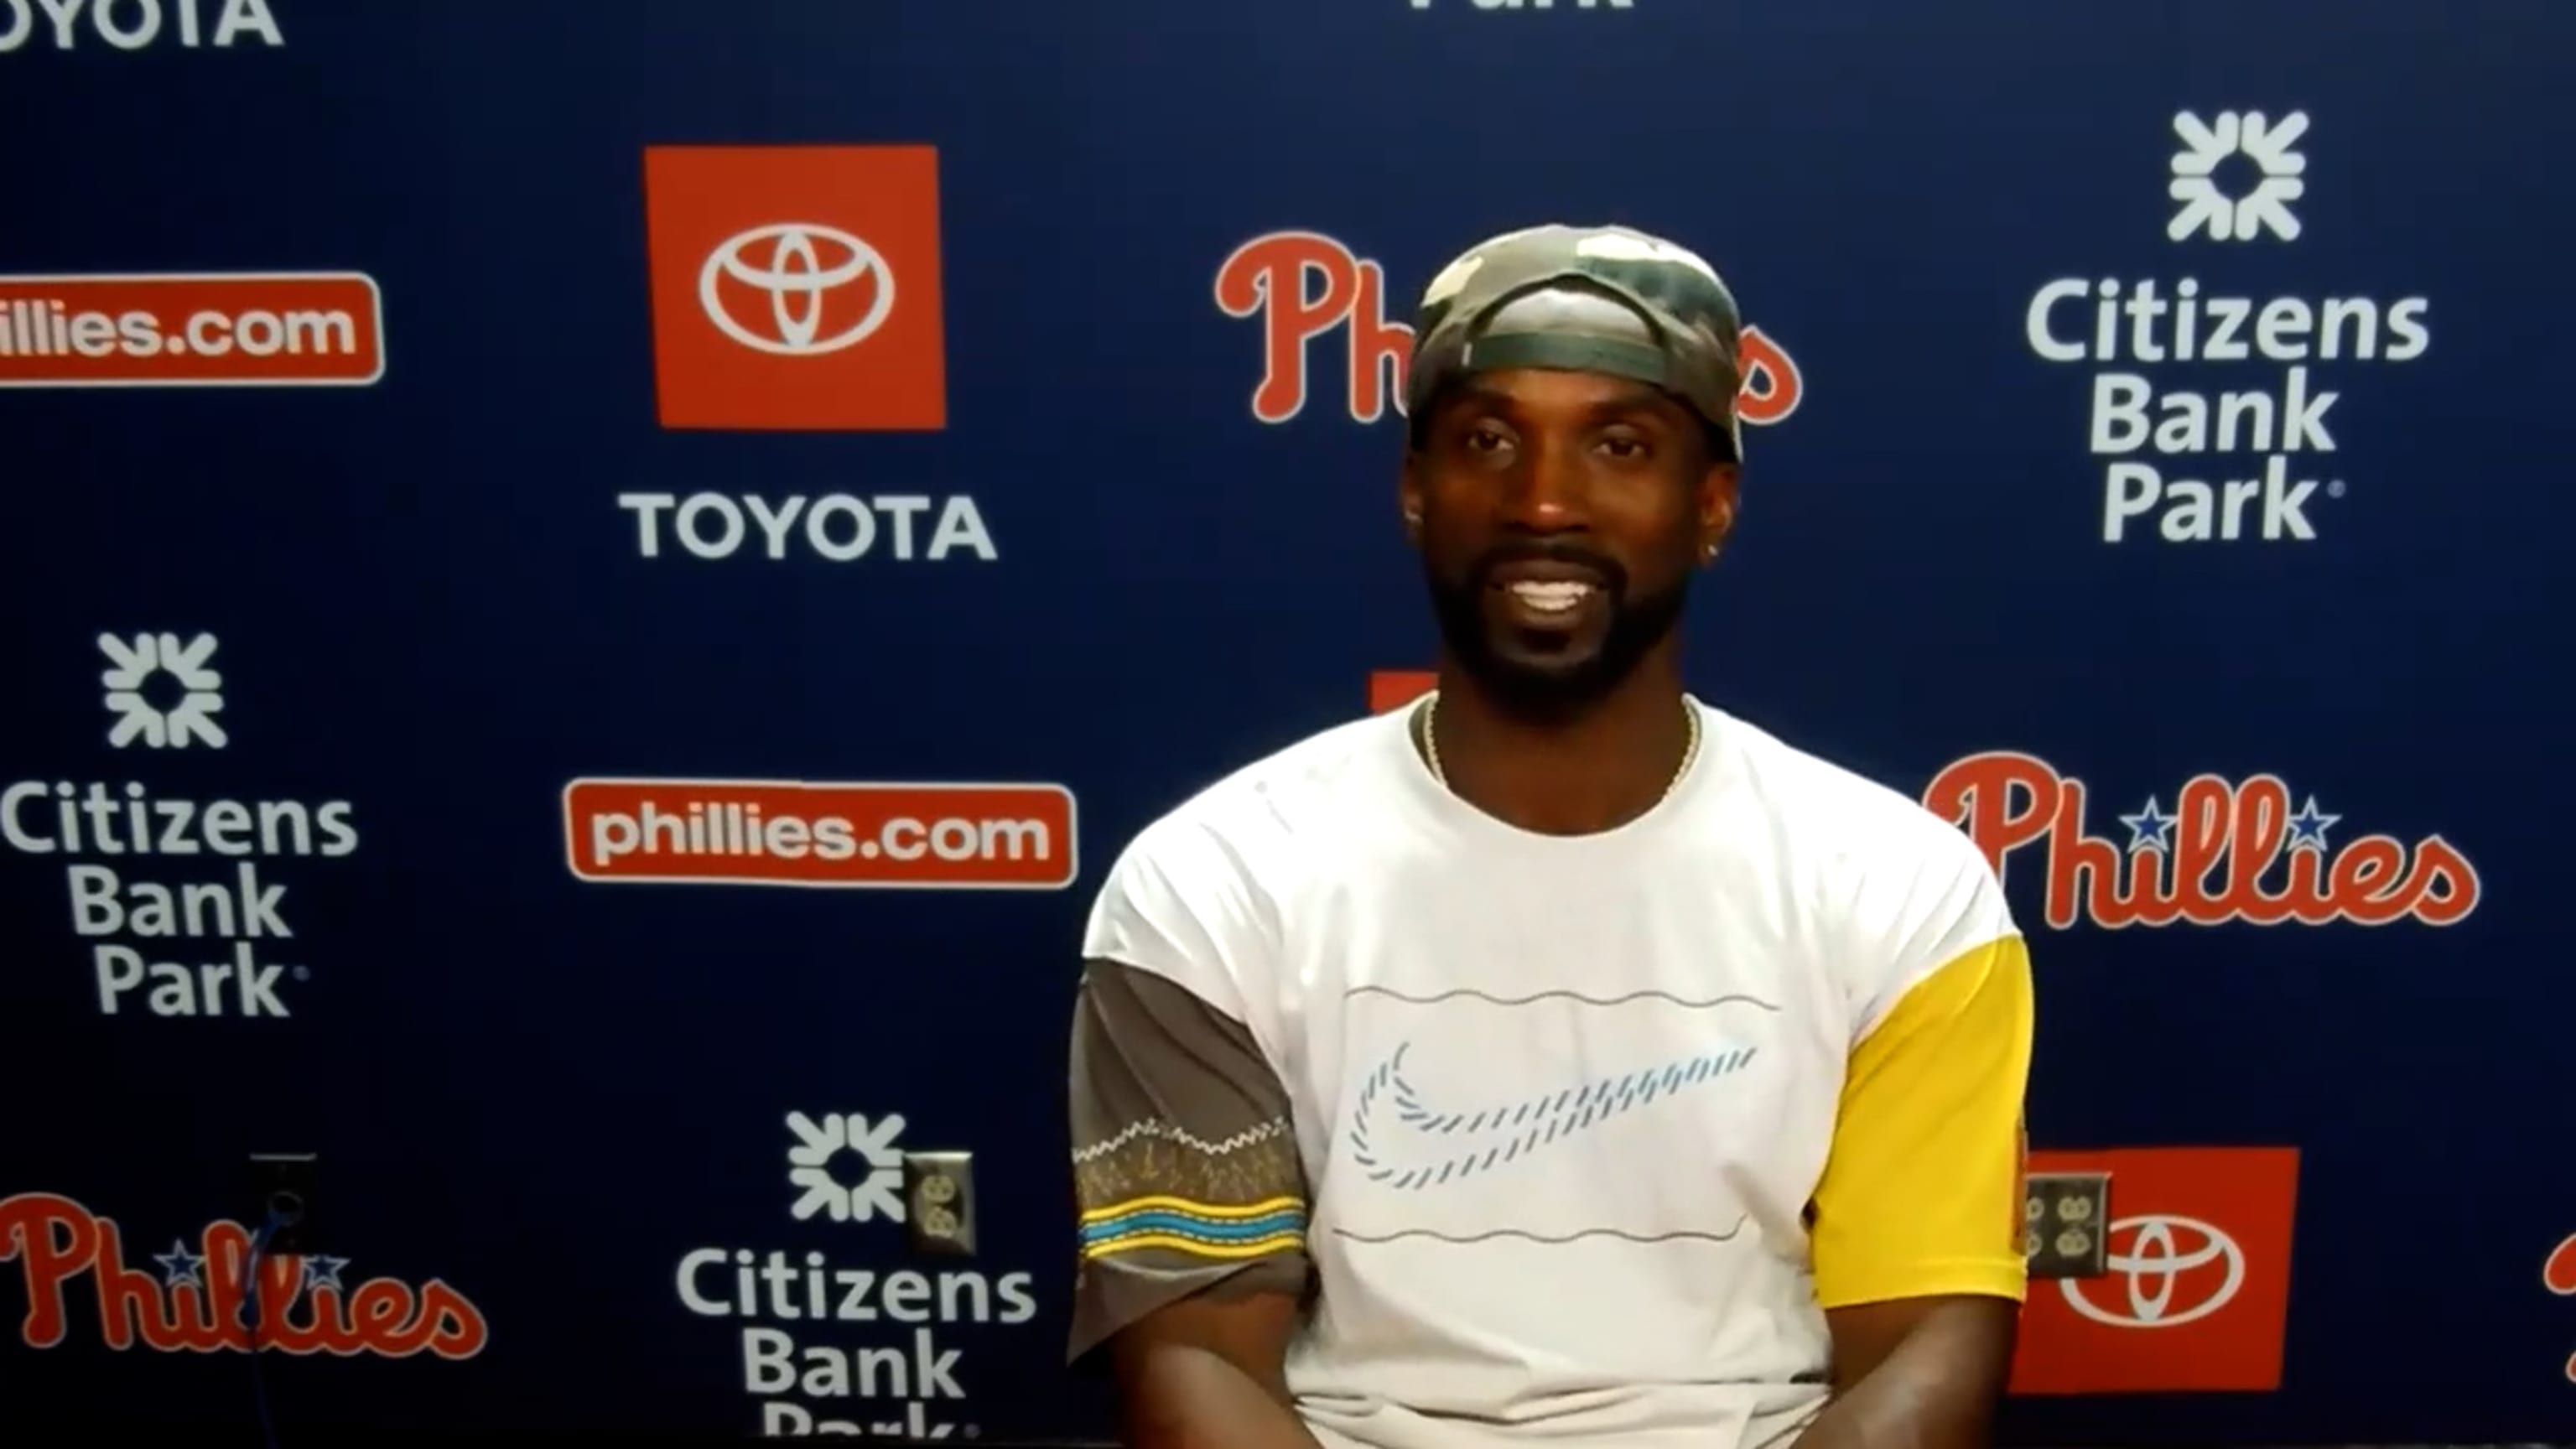 Andrew McCutchen cut off all his hair and life as we know it is